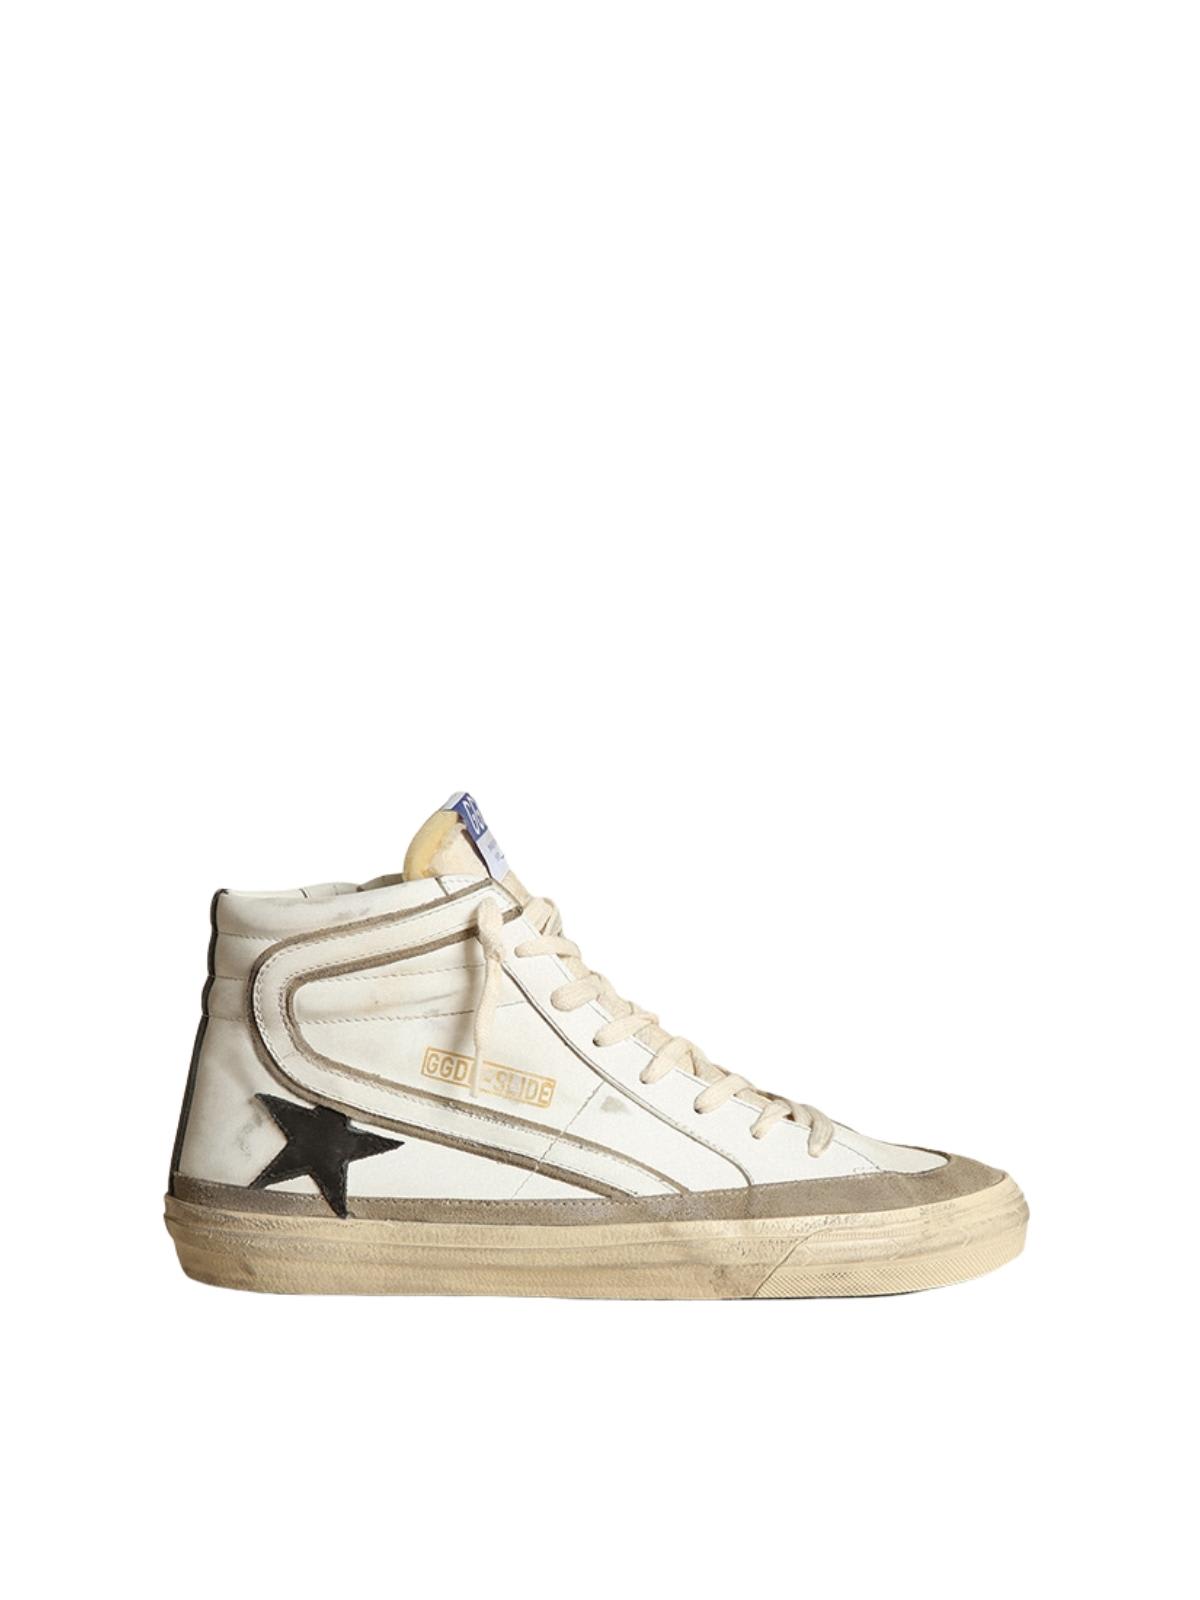 Golden Goose Slide Leather Upper Star List And Wave Foam Toungue Suede All Around